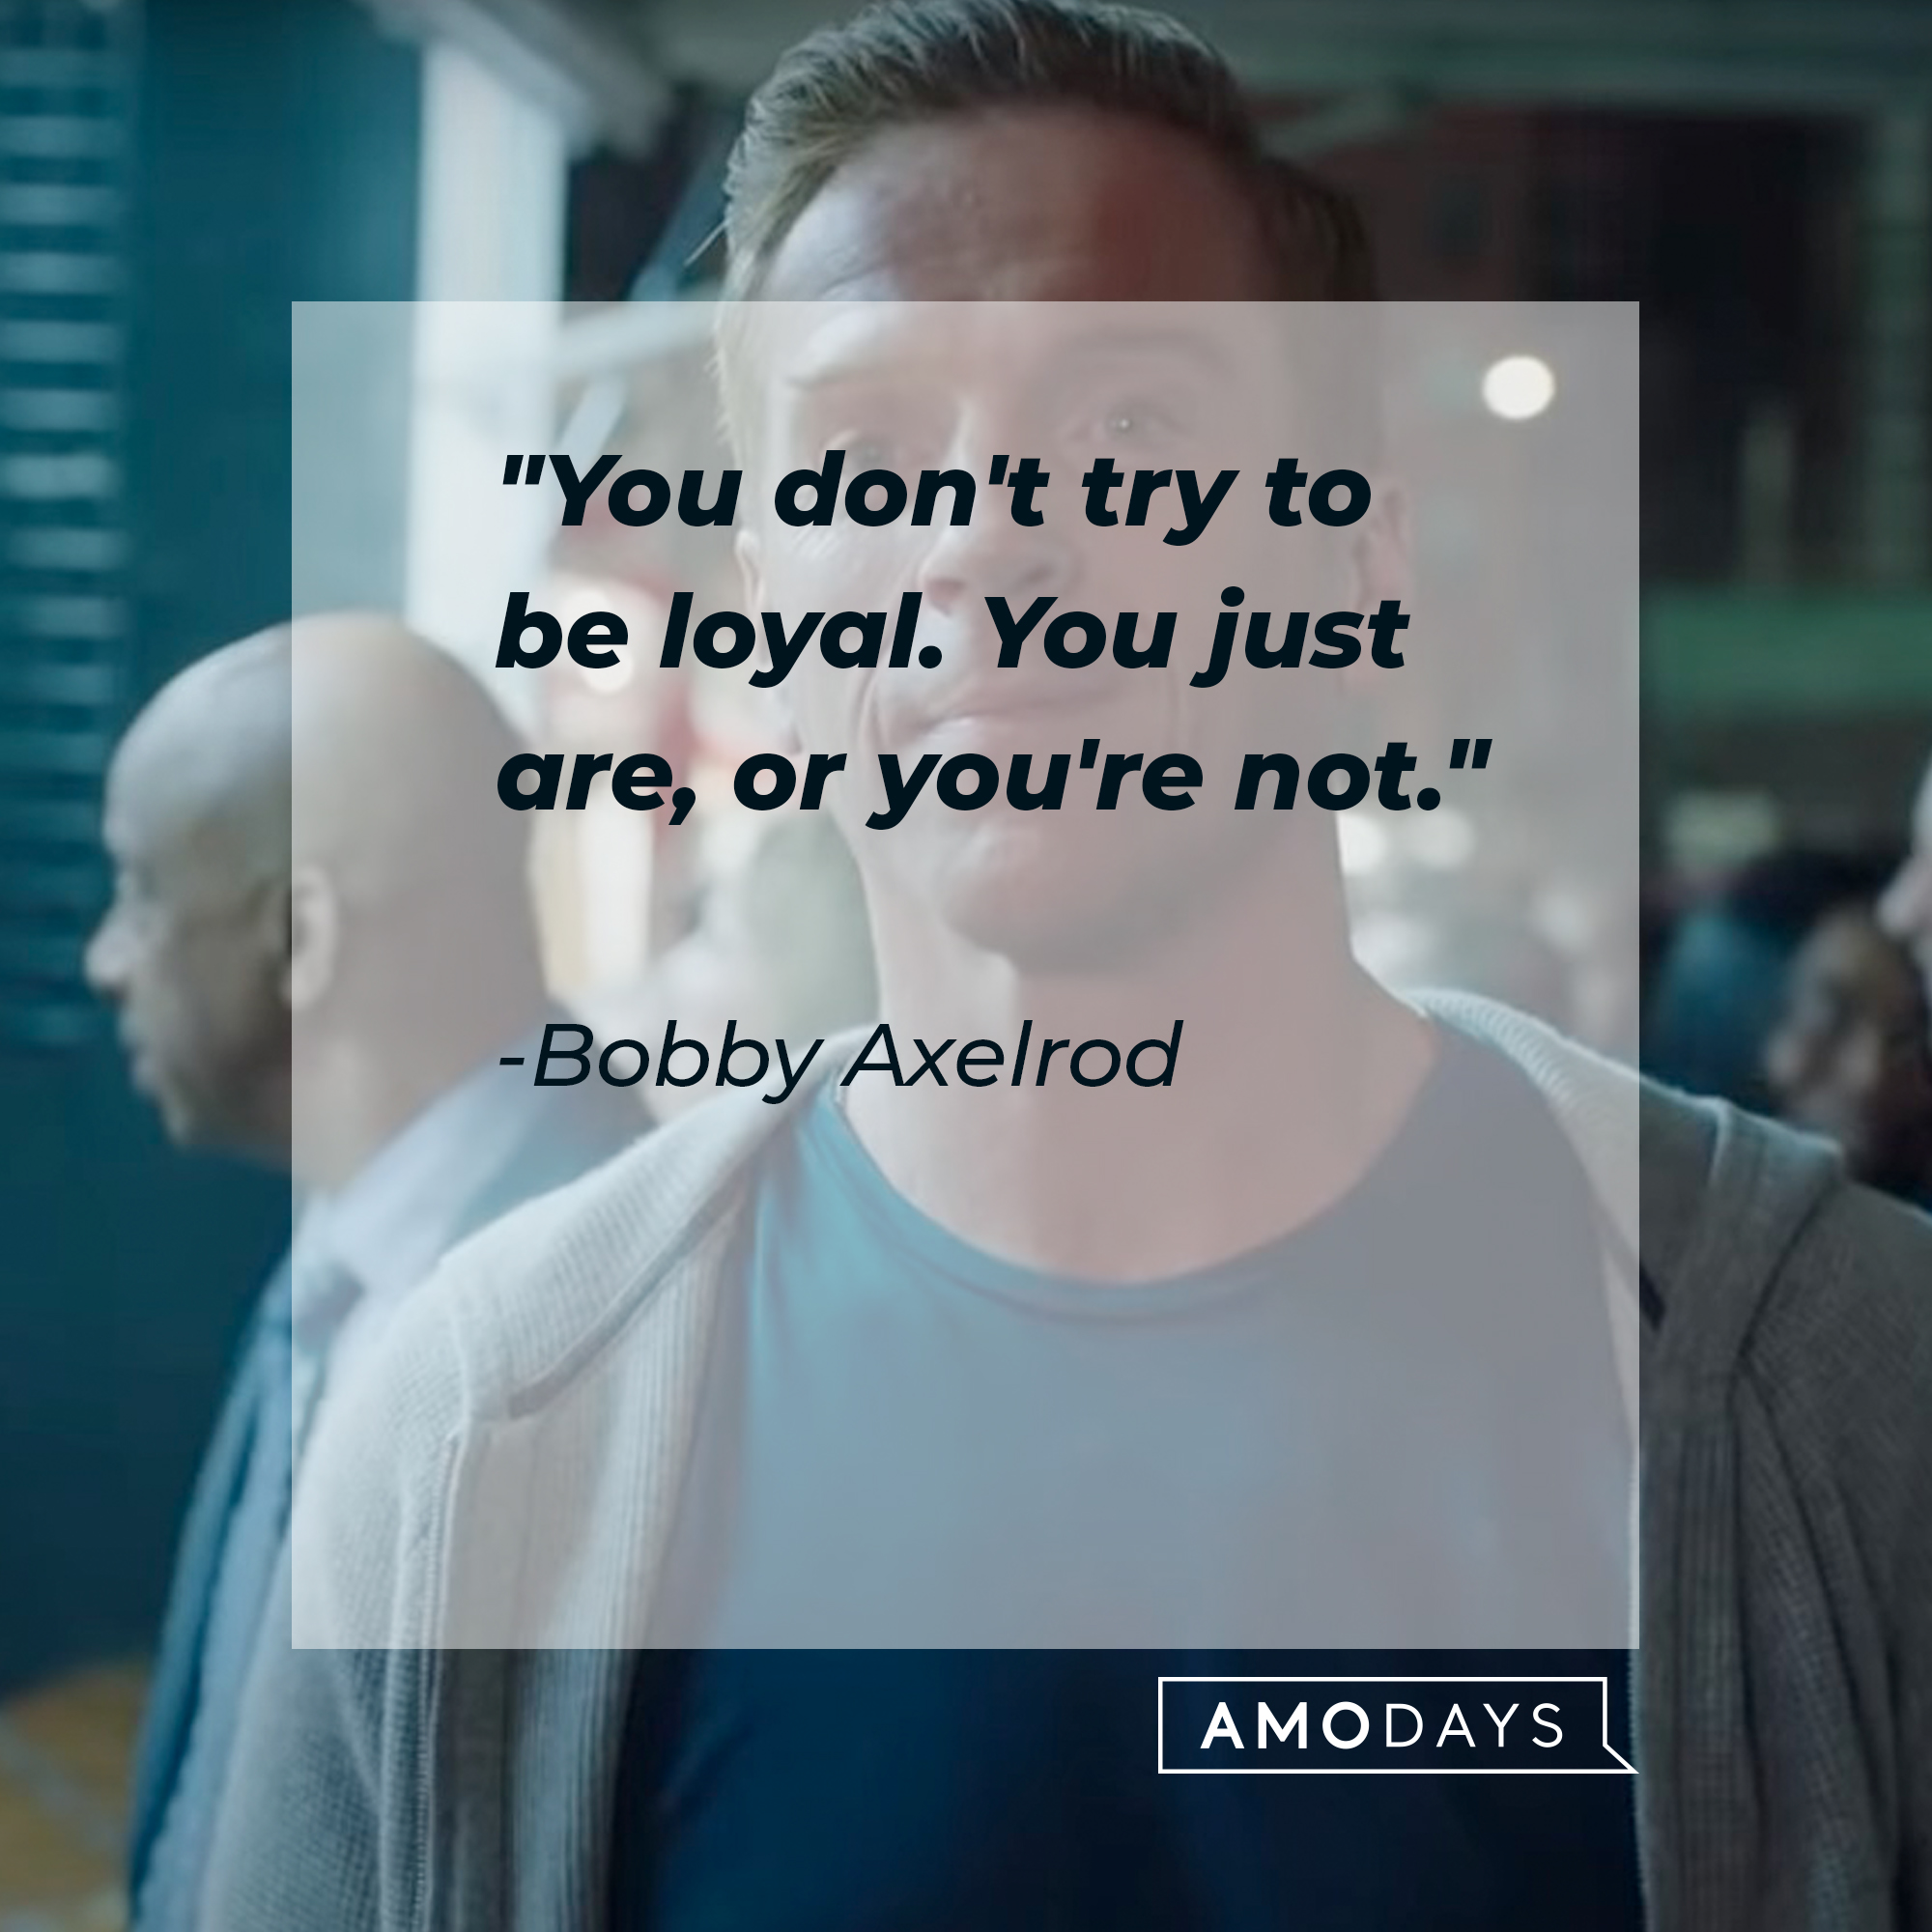 Bobby Axelrod's quote: "You don't try to be loyal. You just are, or you're not." | Source: Youtube.com/BillionsOnShowtime